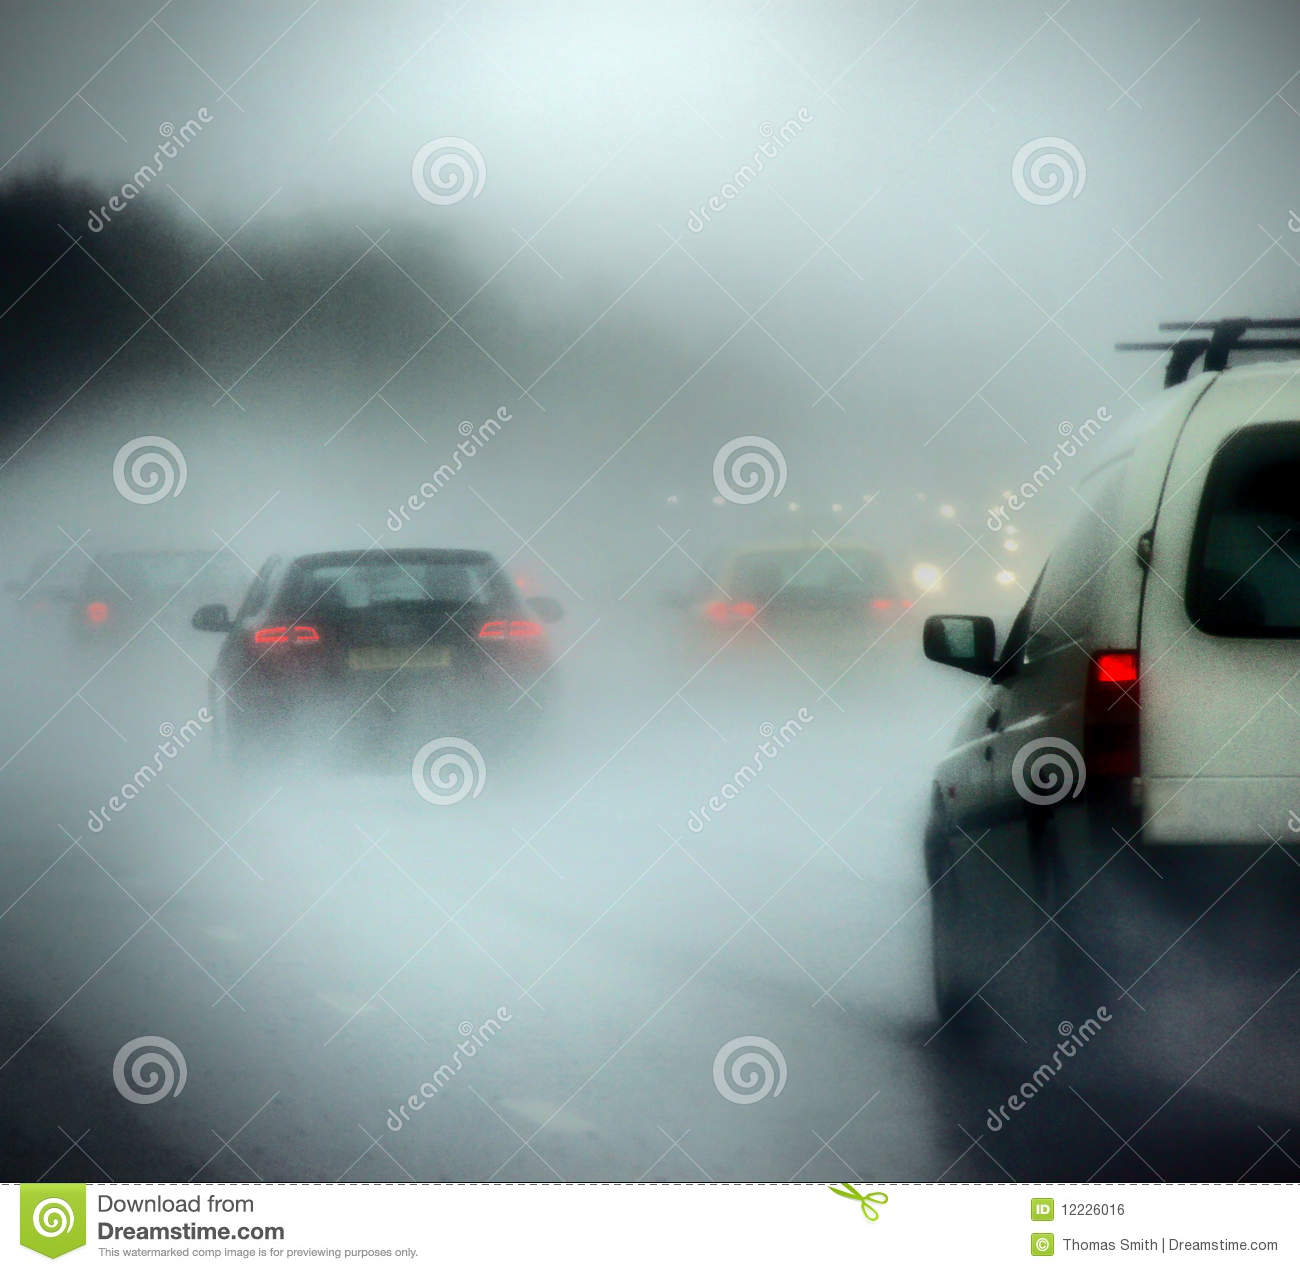 Cars On A Road In Heavy Rain And Fog Royalty Free Stock Image   Image